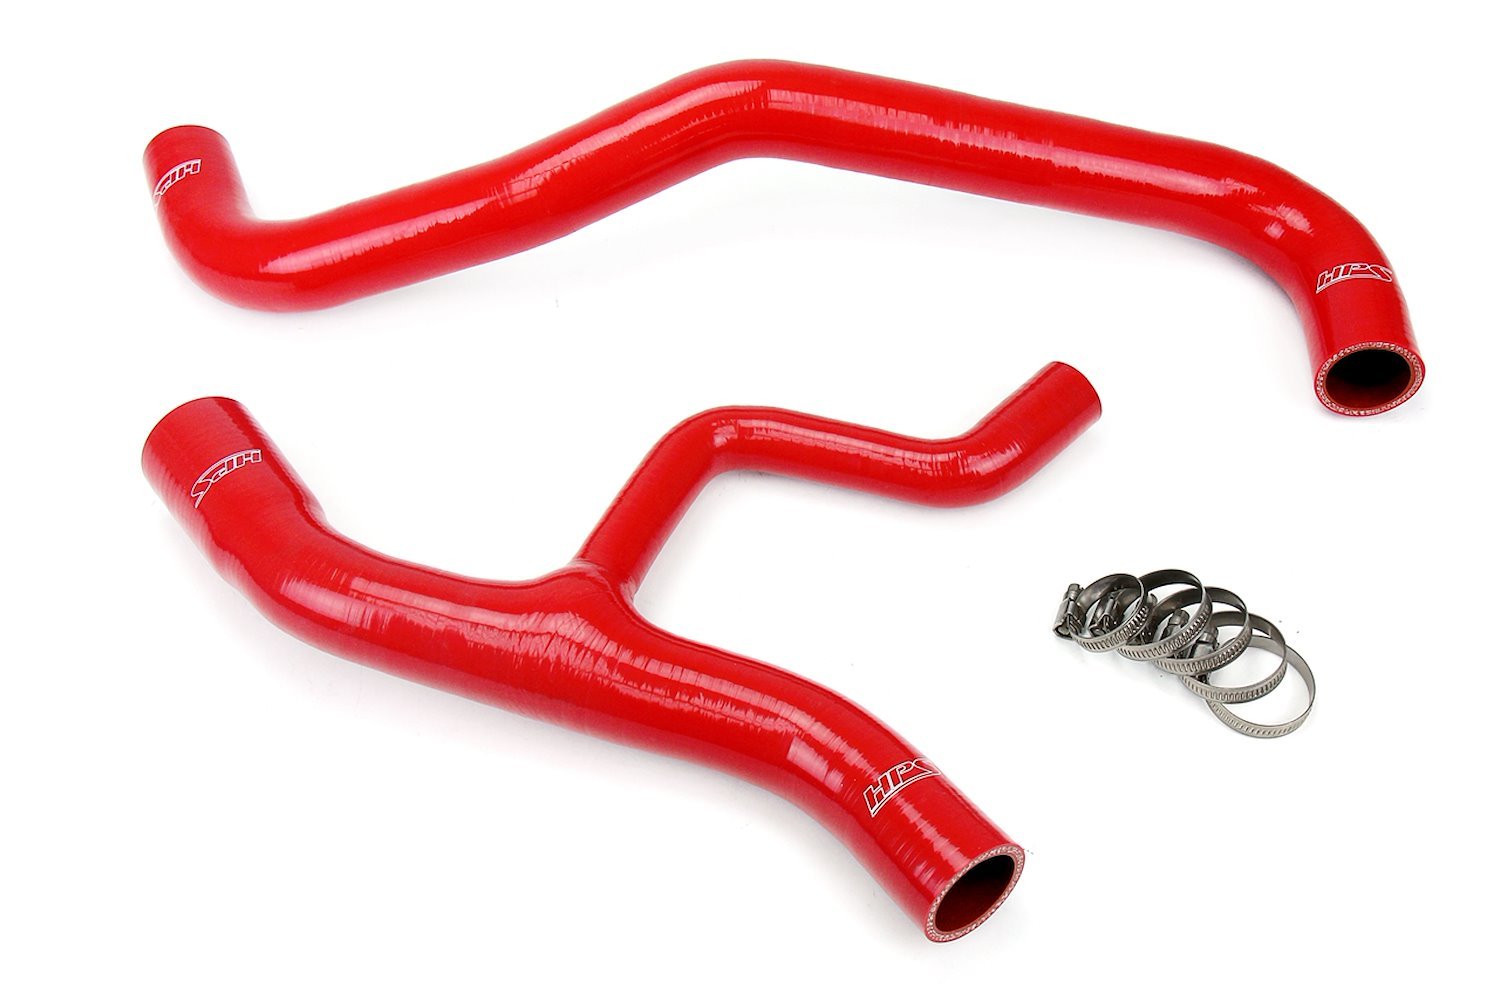 57-1012-RED Radiator Hose Kit, High-Temp 3-Ply Reinforced Silicone, Replace OEM Rubber Radiator Coolant Hoses